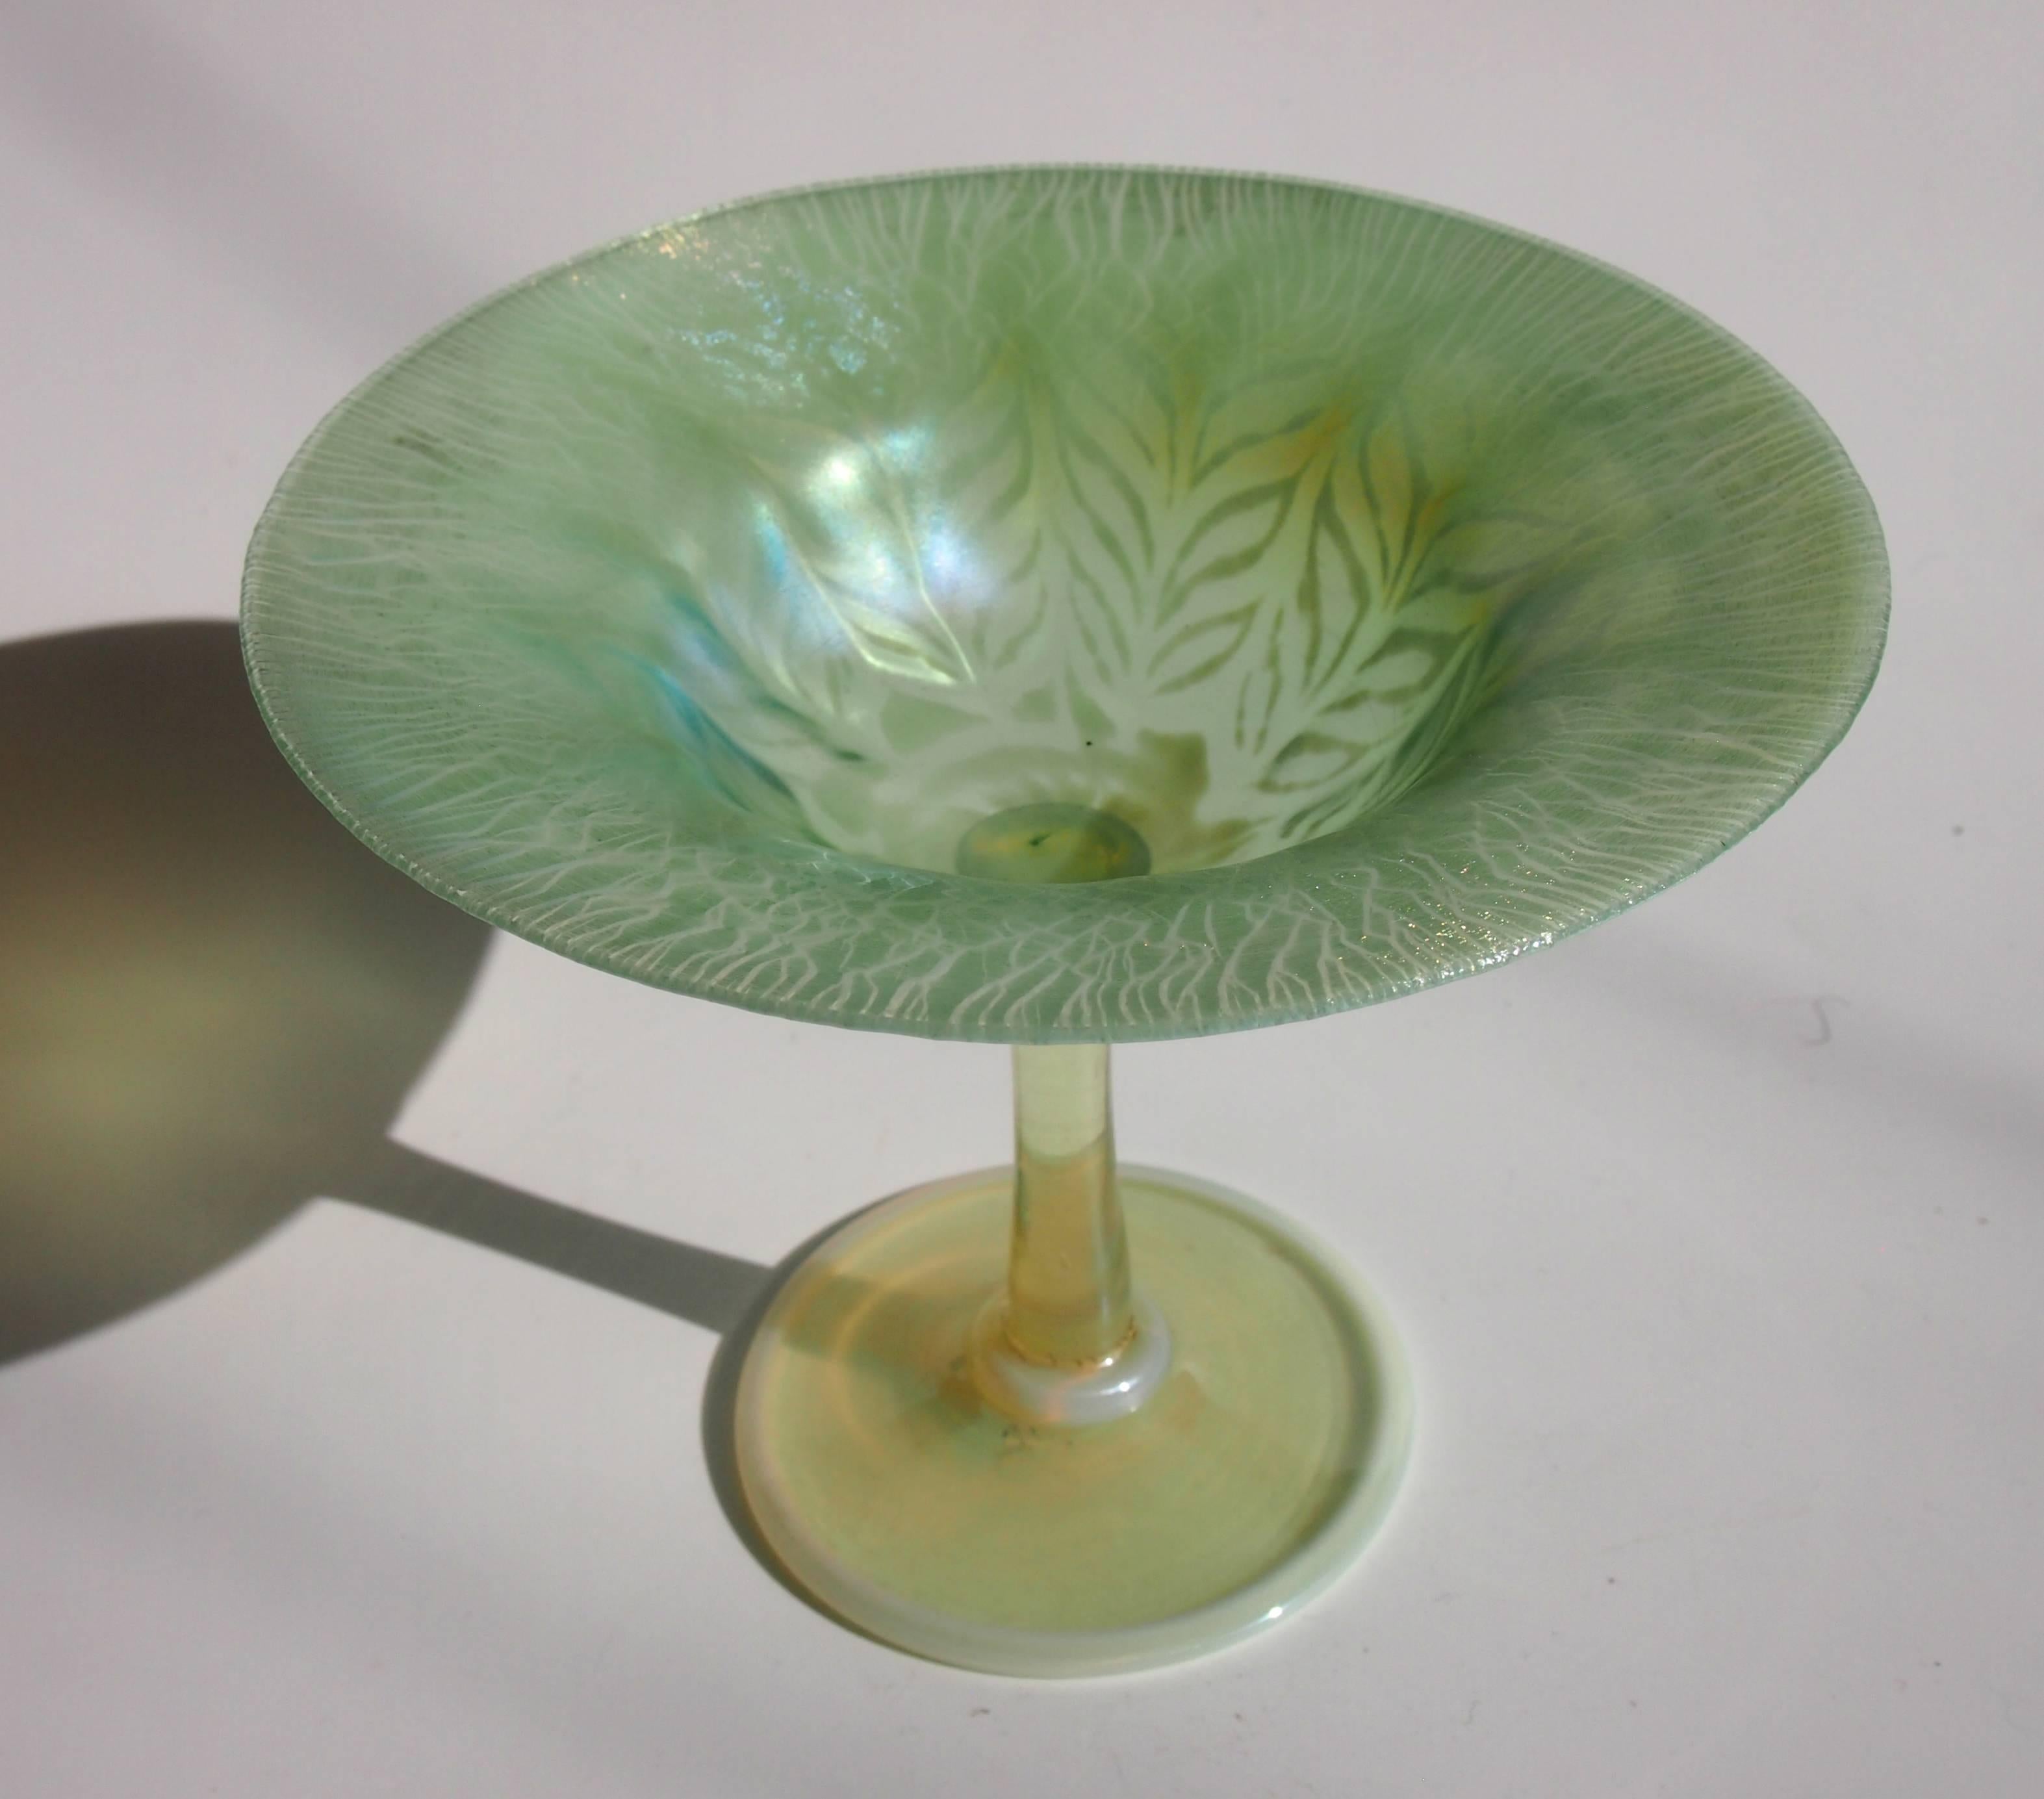 American L C Tiffany Art Nouveau Green and Opal Pastel Favrile Compote